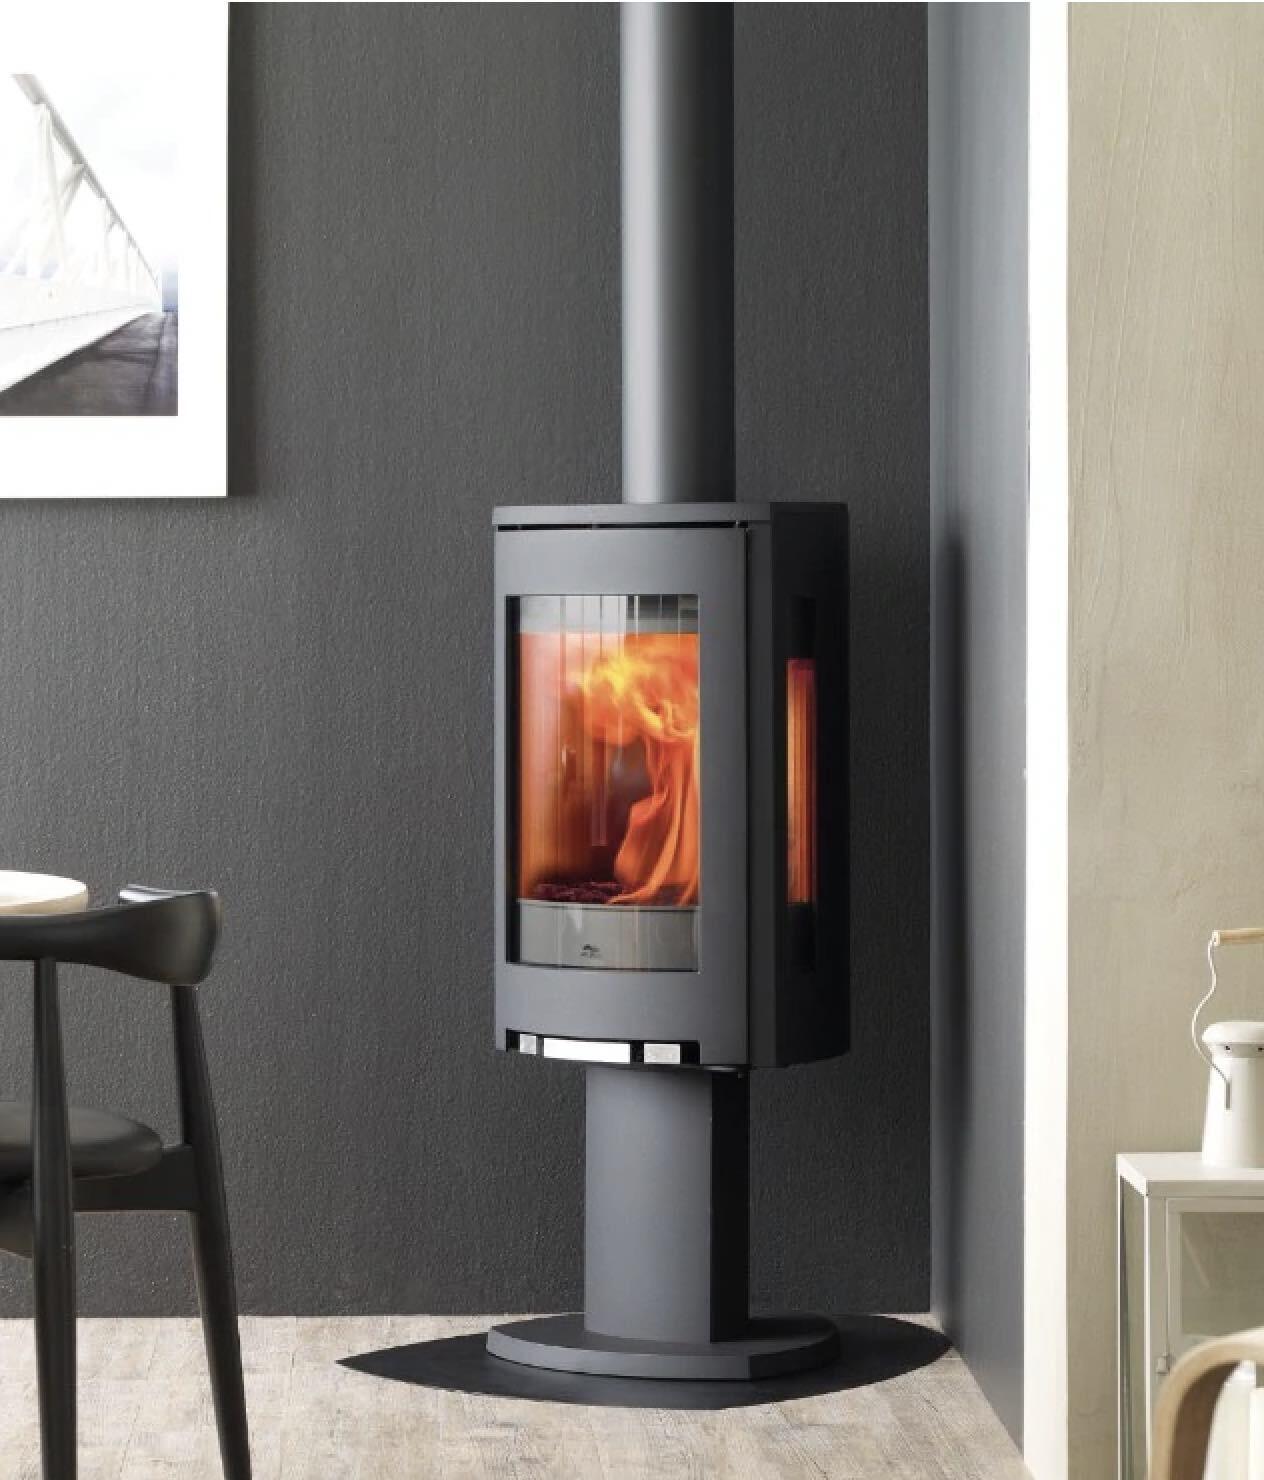 A Woodfire Heater In Coffs Harbour — Gasfitters in Coffs Harbour, NSW